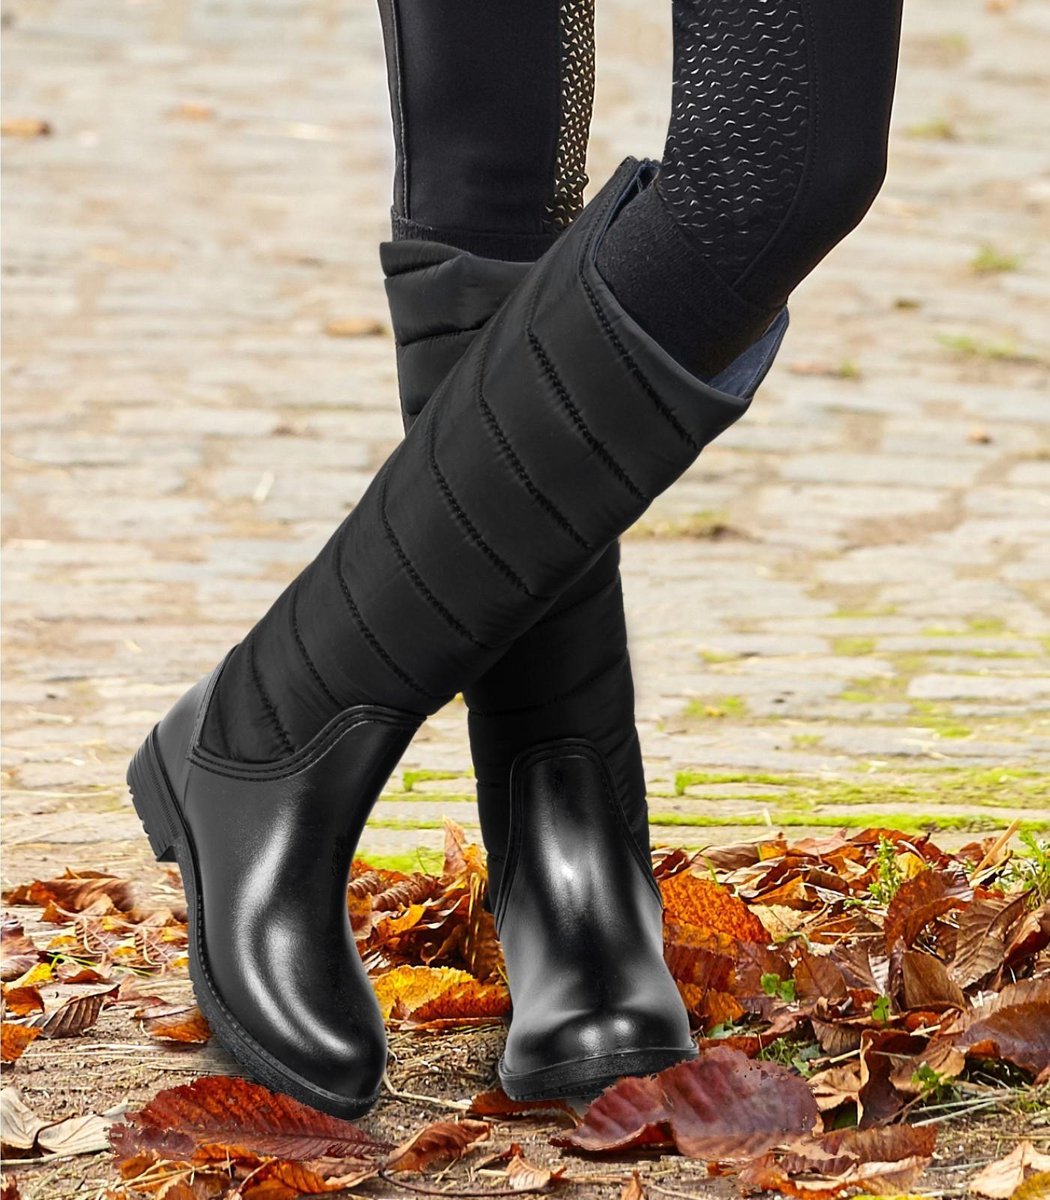 kathedraal Netto dienblad Alesund Thermal Boots | bol.com